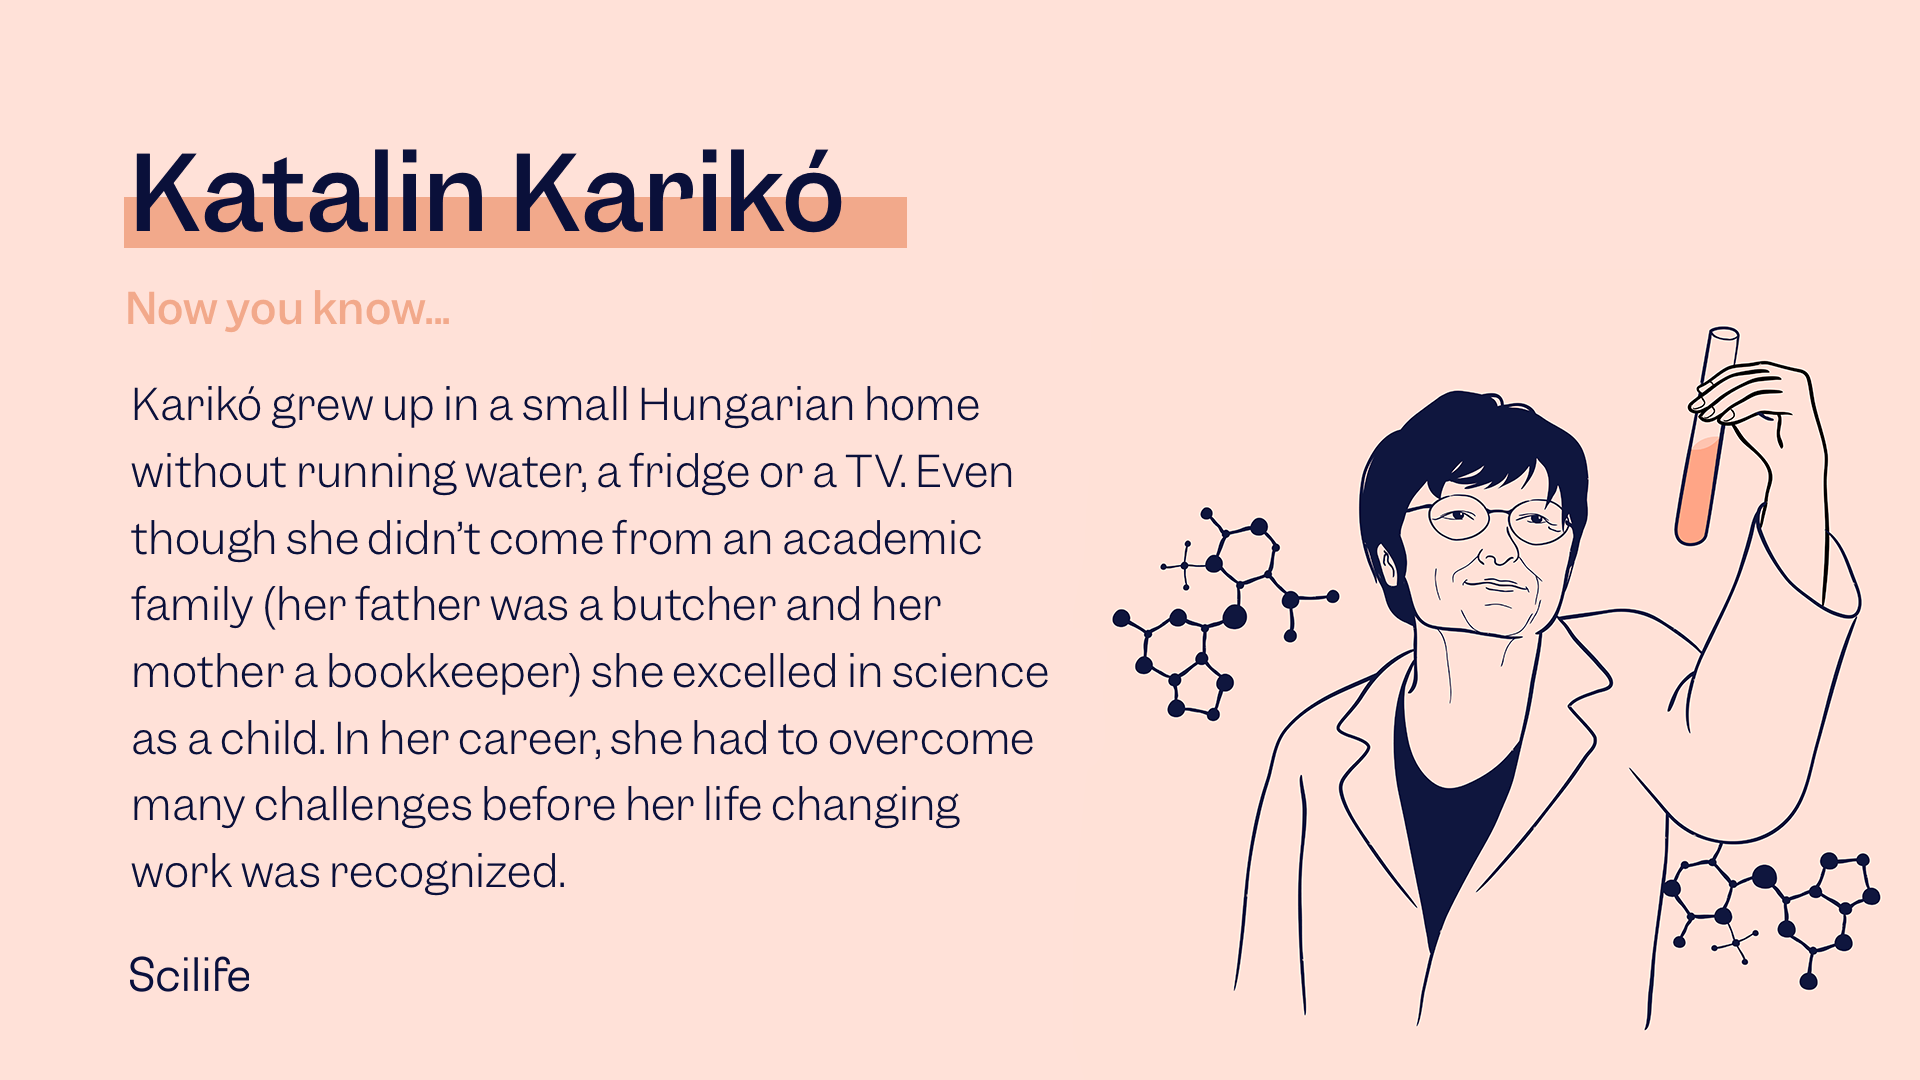 Illustration of Katalin Karikó with the text: Karikó grew up in a small Hungarian home without running water, a fridge or a TV. Even though she didn’t come from an academic family (her father was a butcher and her mother a bookkeeper) she excelled in science as a child. In her career, she had to overcome many challenges before her life changing work was recognized.